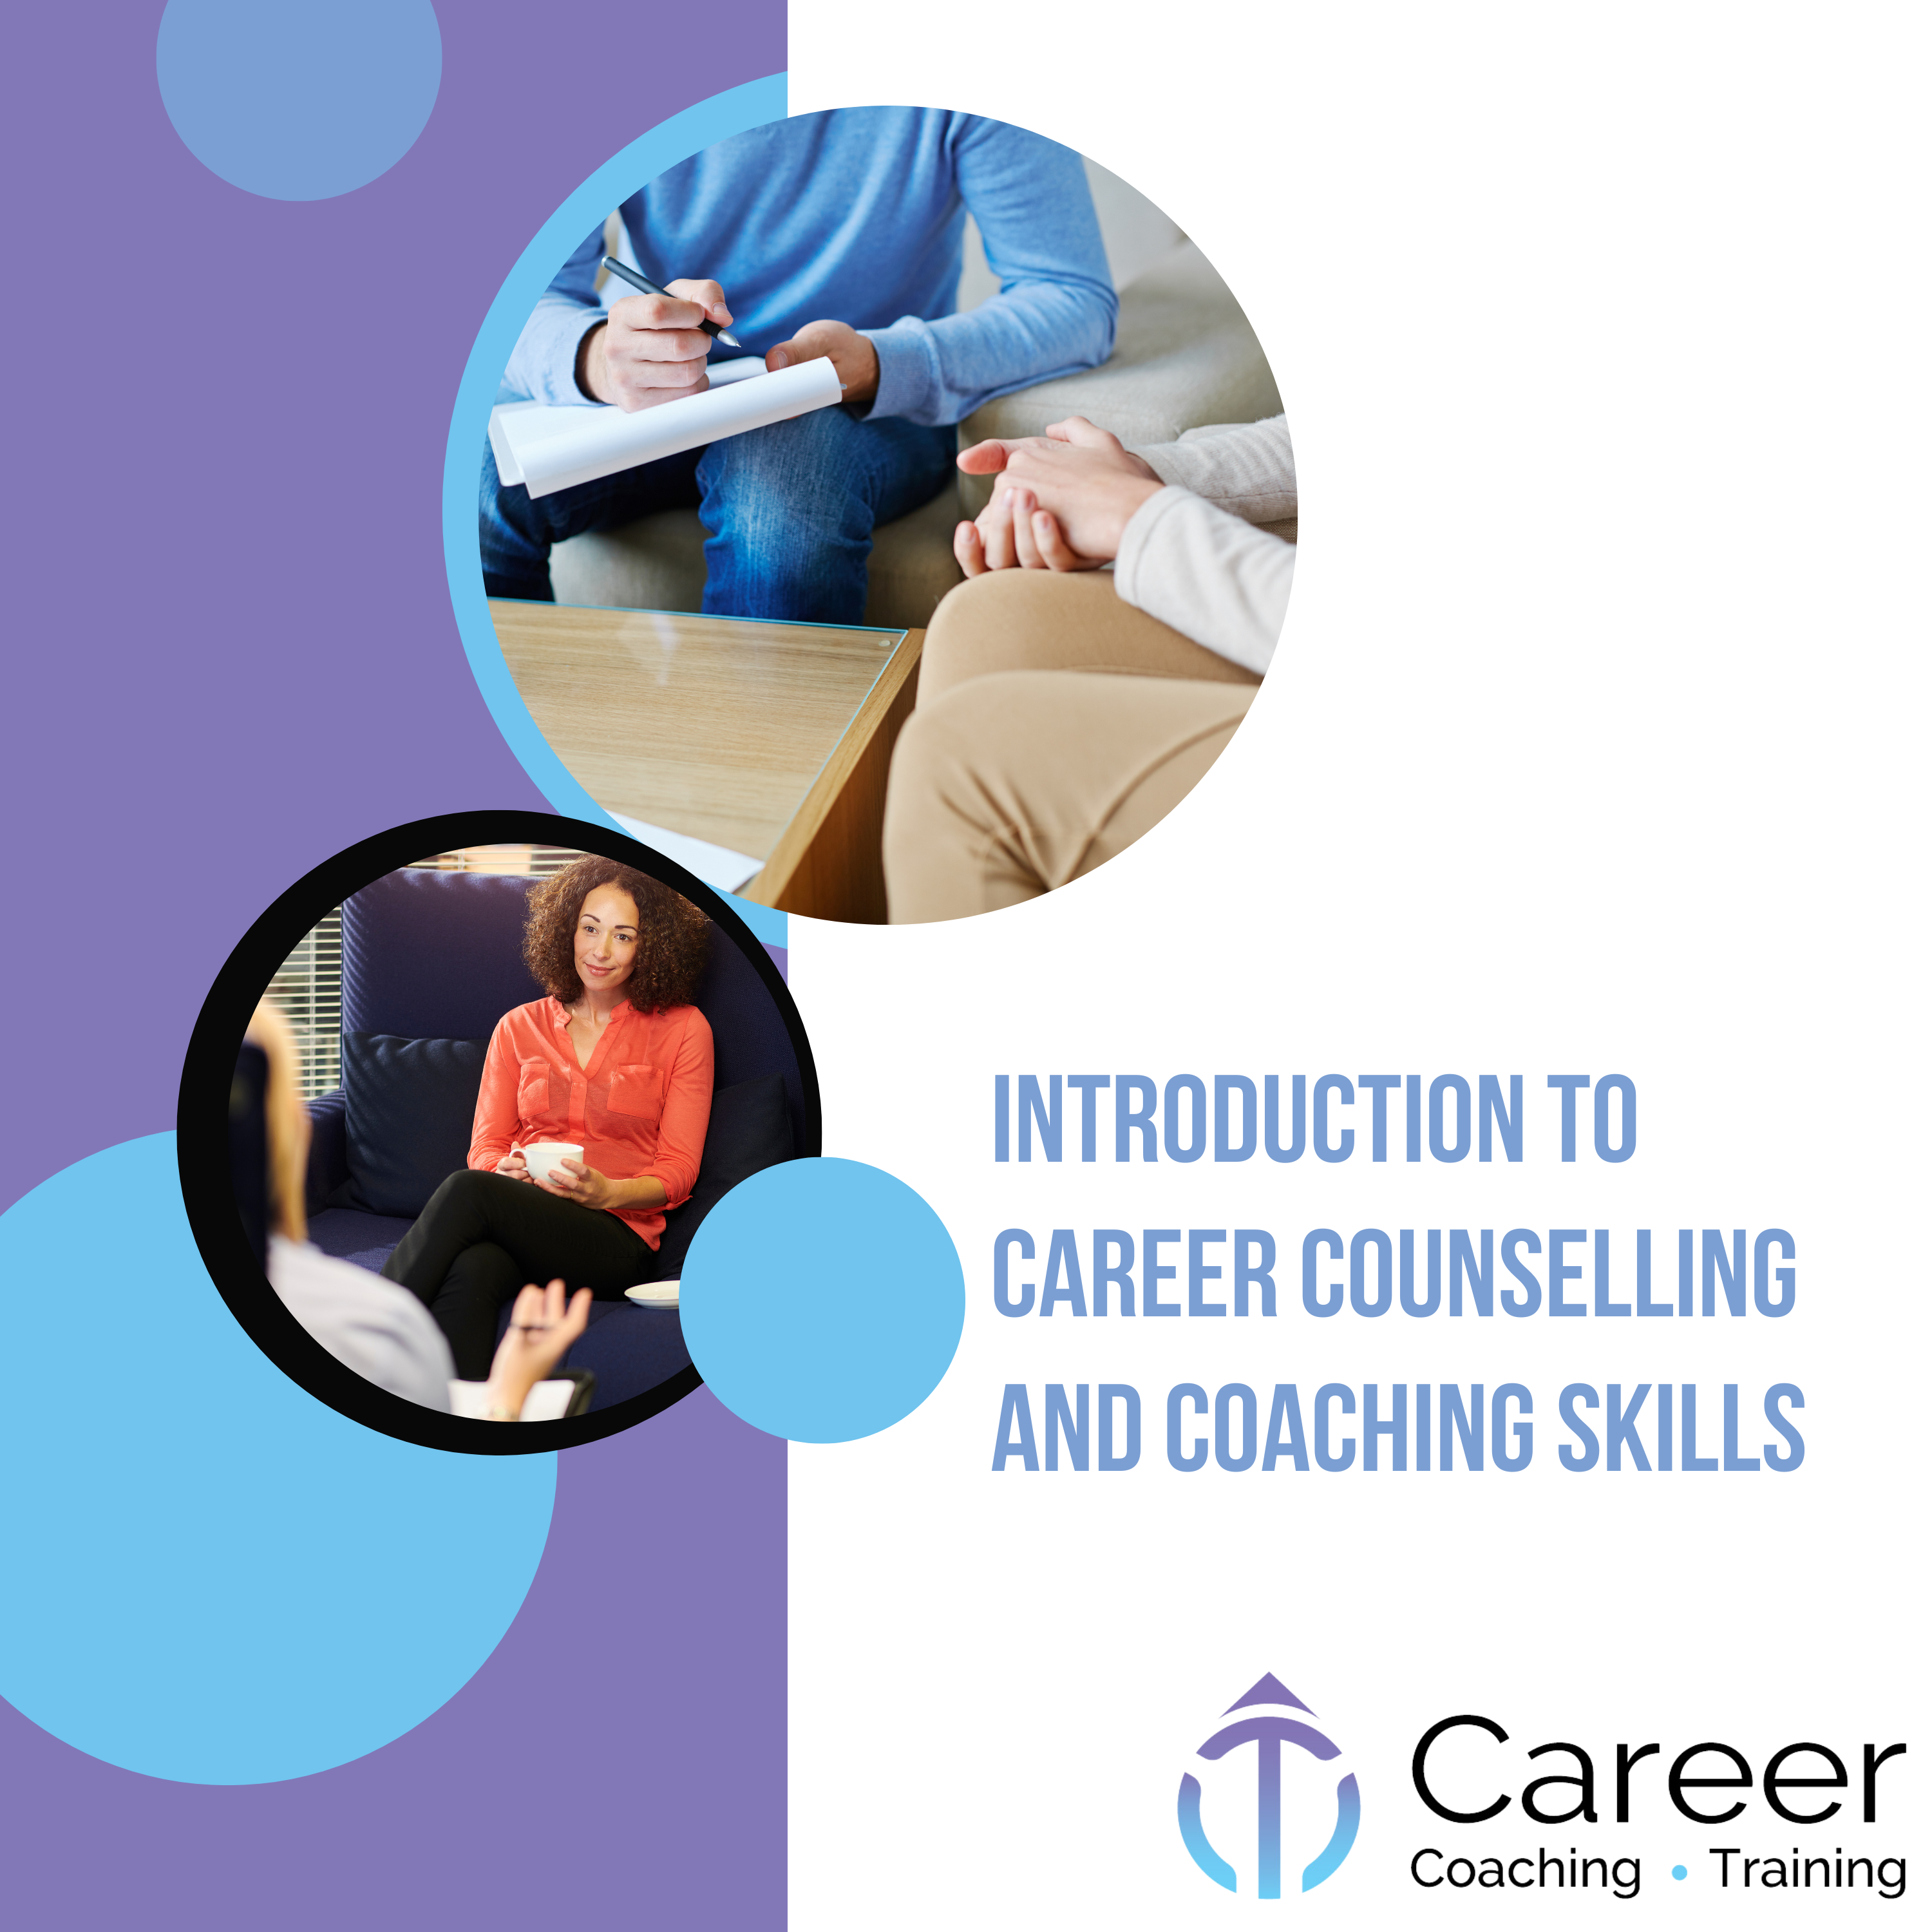 Introduction to Career Counselling and Coaching Skills